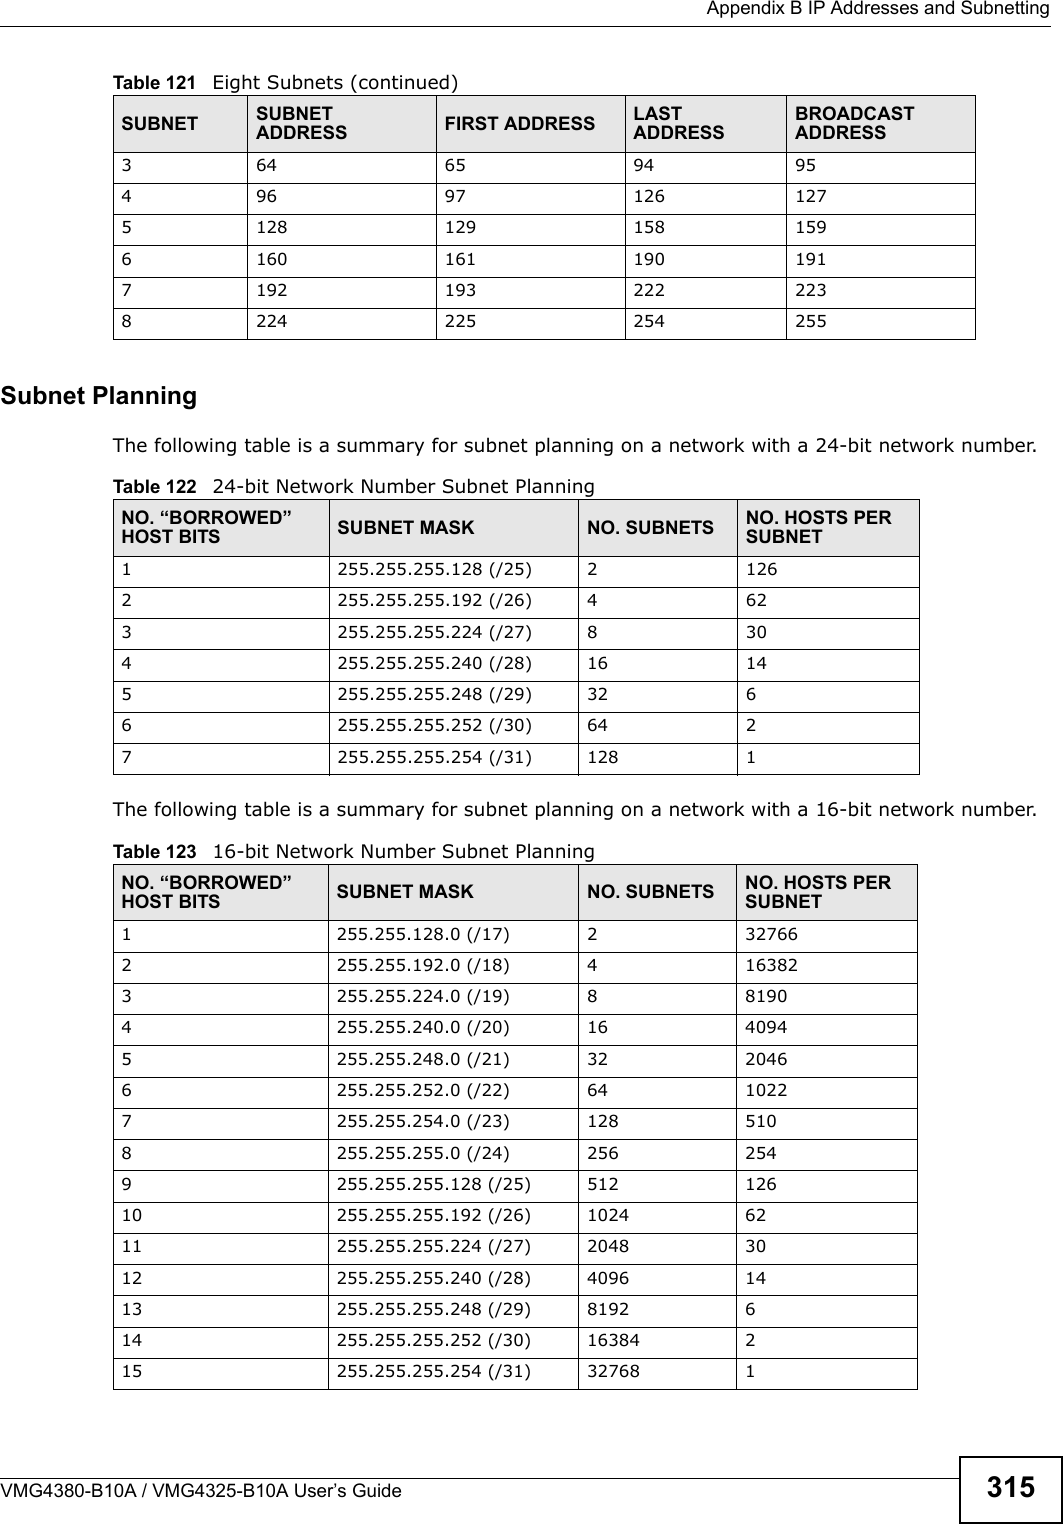  Appendix B IP Addresses and SubnettingVMG4380-B10A / VMG4325-B10A User’s Guide 315Subnet PlanningThe following table is a summary for subnet planning on a network with a 24-bit network number.The following table is a summary for subnet planning on a network with a 16-bit network number. 3 64 65 94 954 96 97 126 1275 128 129 158 1596 160 161 190 1917 192 193 222 2238 224 225 254 255Table 121 Eight Subnets (continued)SUBNET SUBNET ADDRESS FIRST ADDRESS LASTADDRESSBROADCAST ADDRESSTable 122   24-bit Network Number Subnet PlanningNO. “BORROWED” HOST BITS SUBNET MASK NO. SUBNETS NO. HOSTS PERSUBNET1 255.255.255.128 (/25) 2 1262 255.255.255.192 (/26) 4 623 255.255.255.224 (/27) 8 304 255.255.255.240 (/28) 16 145 255.255.255.248 (/29) 32 66 255.255.255.252 (/30) 64 27 255.255.255.254 (/31) 128 1Table 123 16-bit Network Number Subnet PlanningNO. “BORROWED” HOST BITS SUBNET MASK NO. SUBNETS NO. HOSTS PER SUBNET1 255.255.128.0 (/17) 2 327662 255.255.192.0 (/18) 4 163823 255.255.224.0 (/19) 8 81904 255.255.240.0 (/20) 16 40945 255.255.248.0 (/21) 32 20466 255.255.252.0 (/22) 64 10227 255.255.254.0 (/23) 128 5108 255.255.255.0 (/24) 256 2549 255.255.255.128 (/25) 512 12610 255.255.255.192 (/26) 1024 6211 255.255.255.224 (/27) 2048 3012 255.255.255.240 (/28) 4096 1413 255.255.255.248 (/29) 8192 614 255.255.255.252 (/30) 16384 215 255.255.255.254 (/31) 32768 1